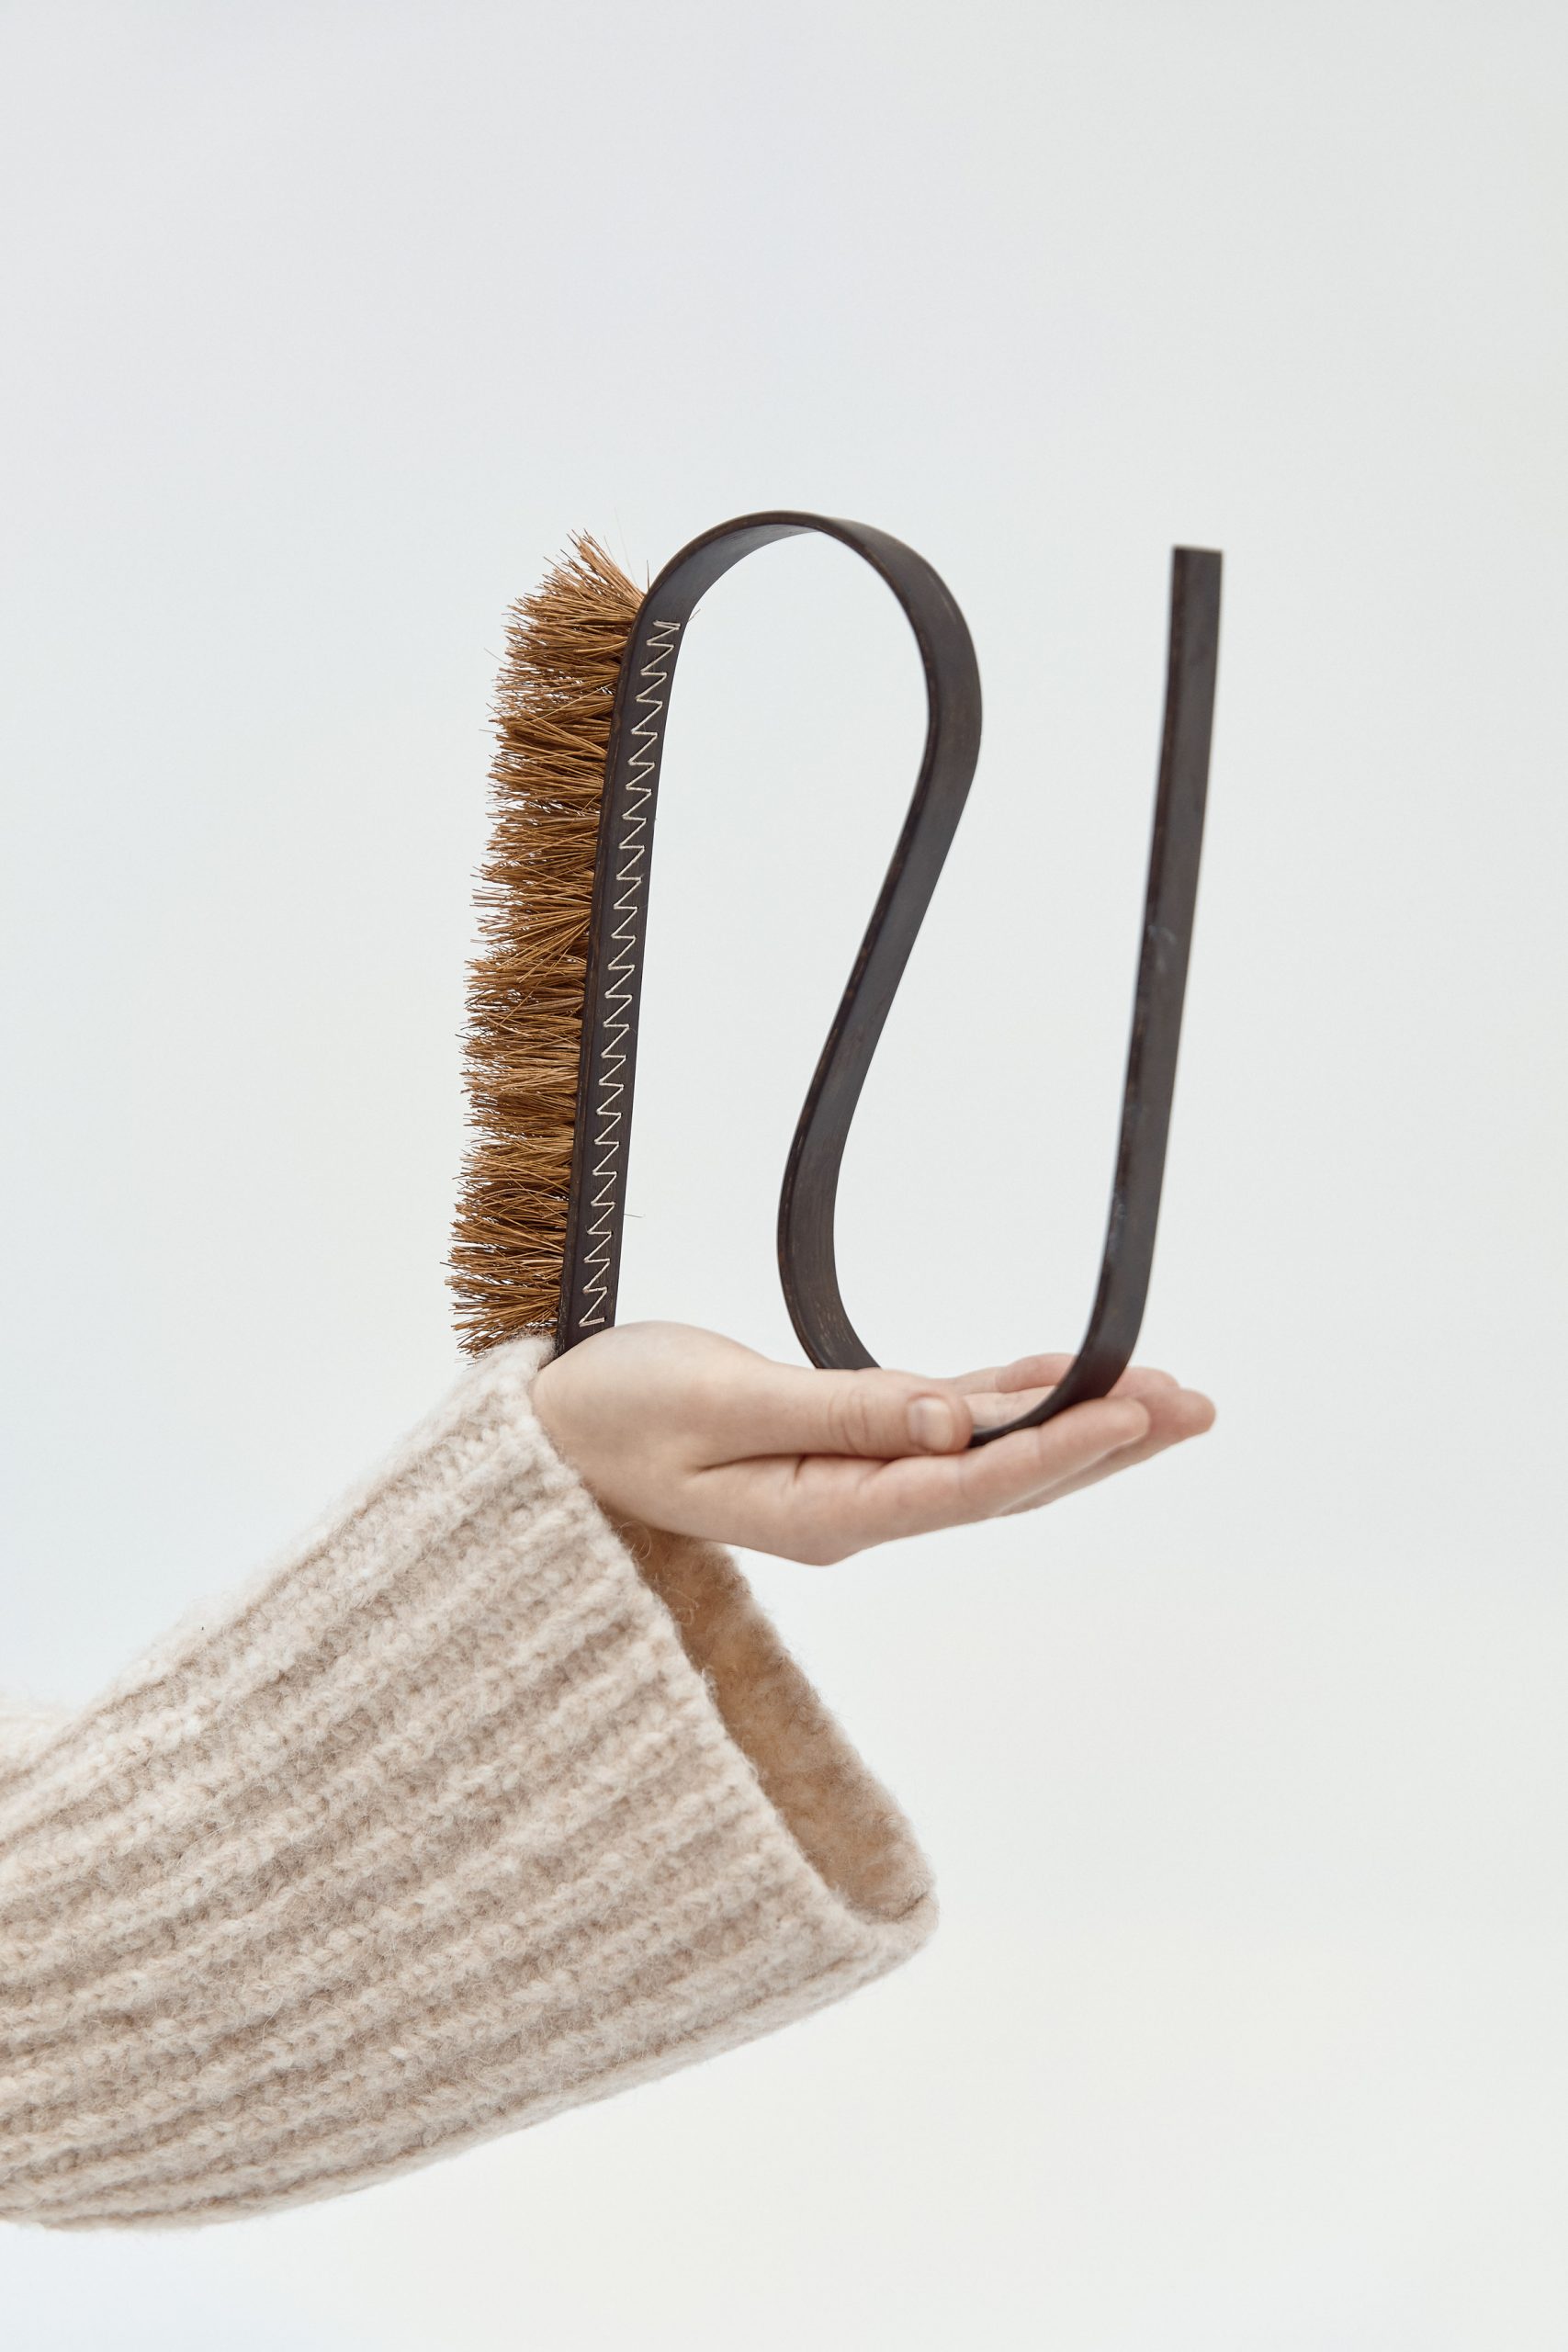 The Bue brushes are designed to be "enjoyed in and out of use"